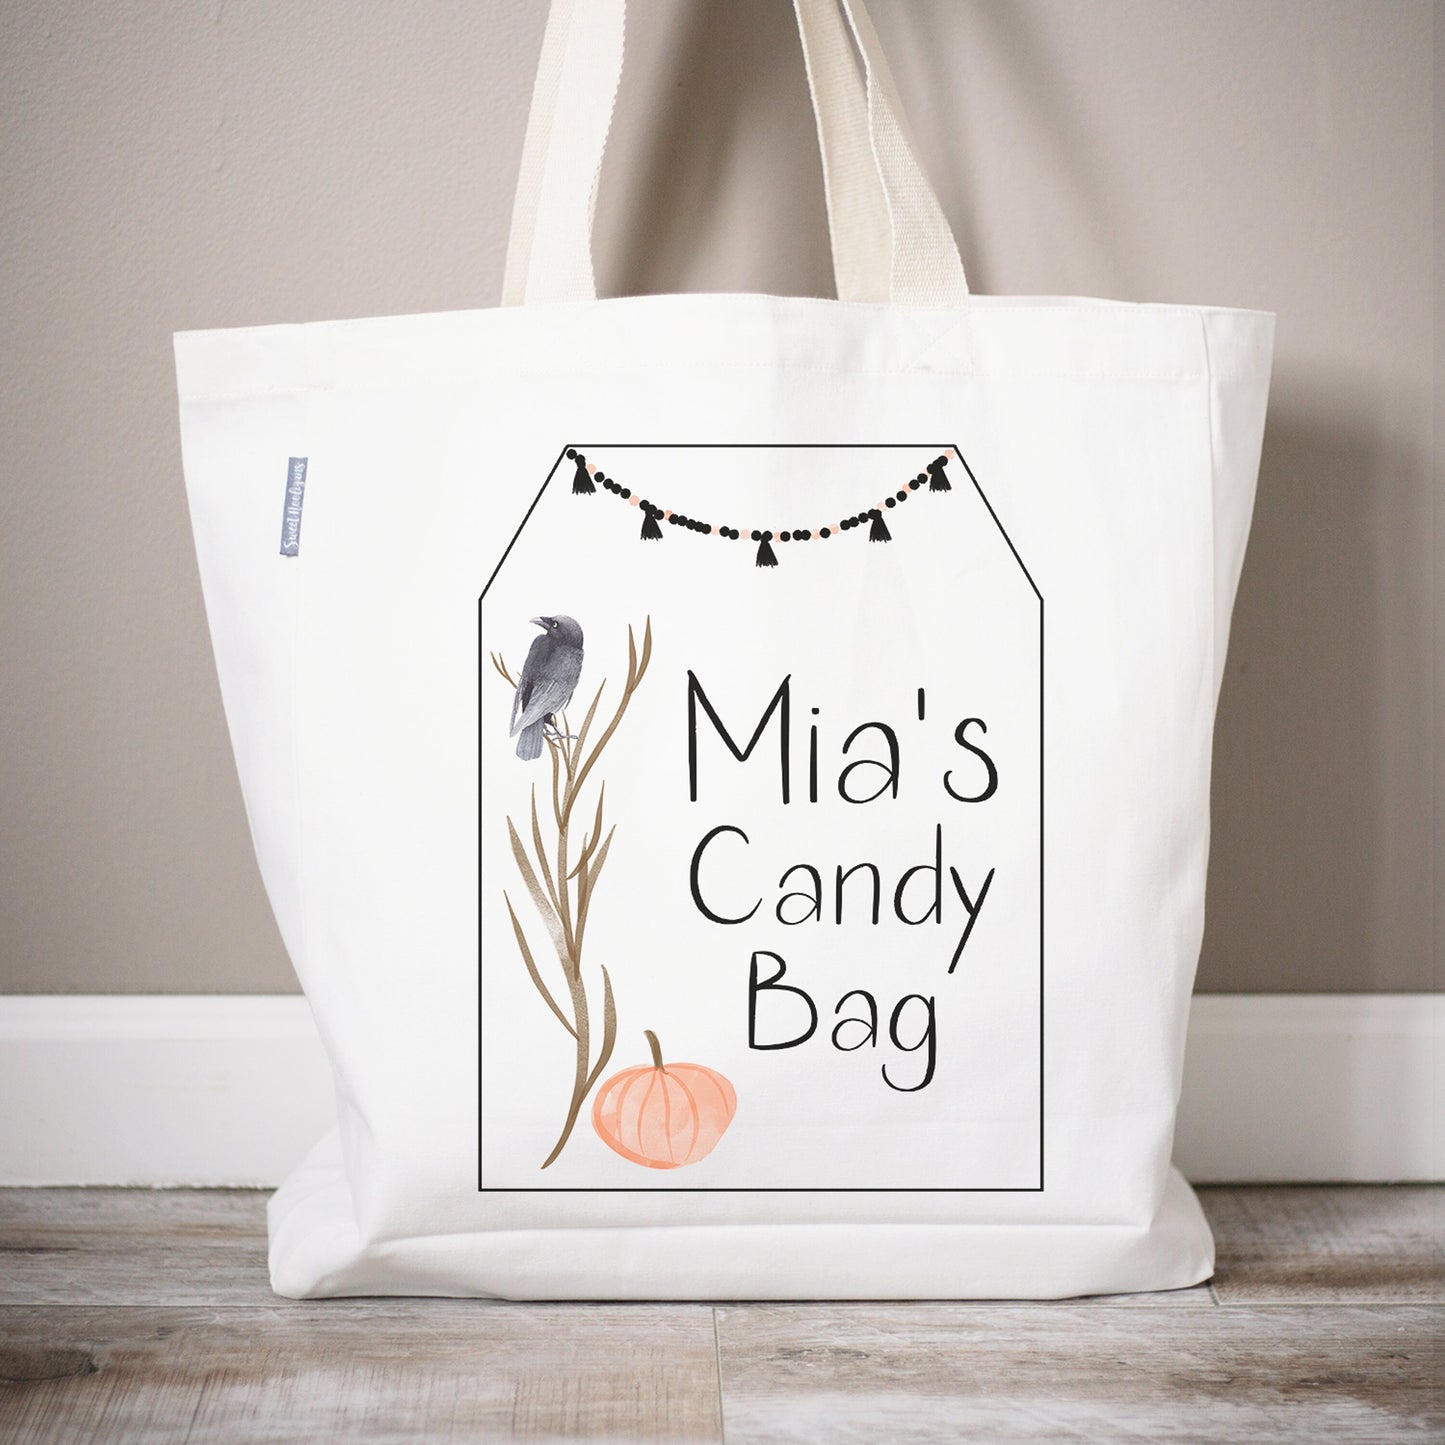 Load image into Gallery viewer, Personalized Black Raven Halloween Candy Bag Gift | Trick or Treat Candy Bag | Halloween Party Bag | First Halloween Trick or Treating Bag
